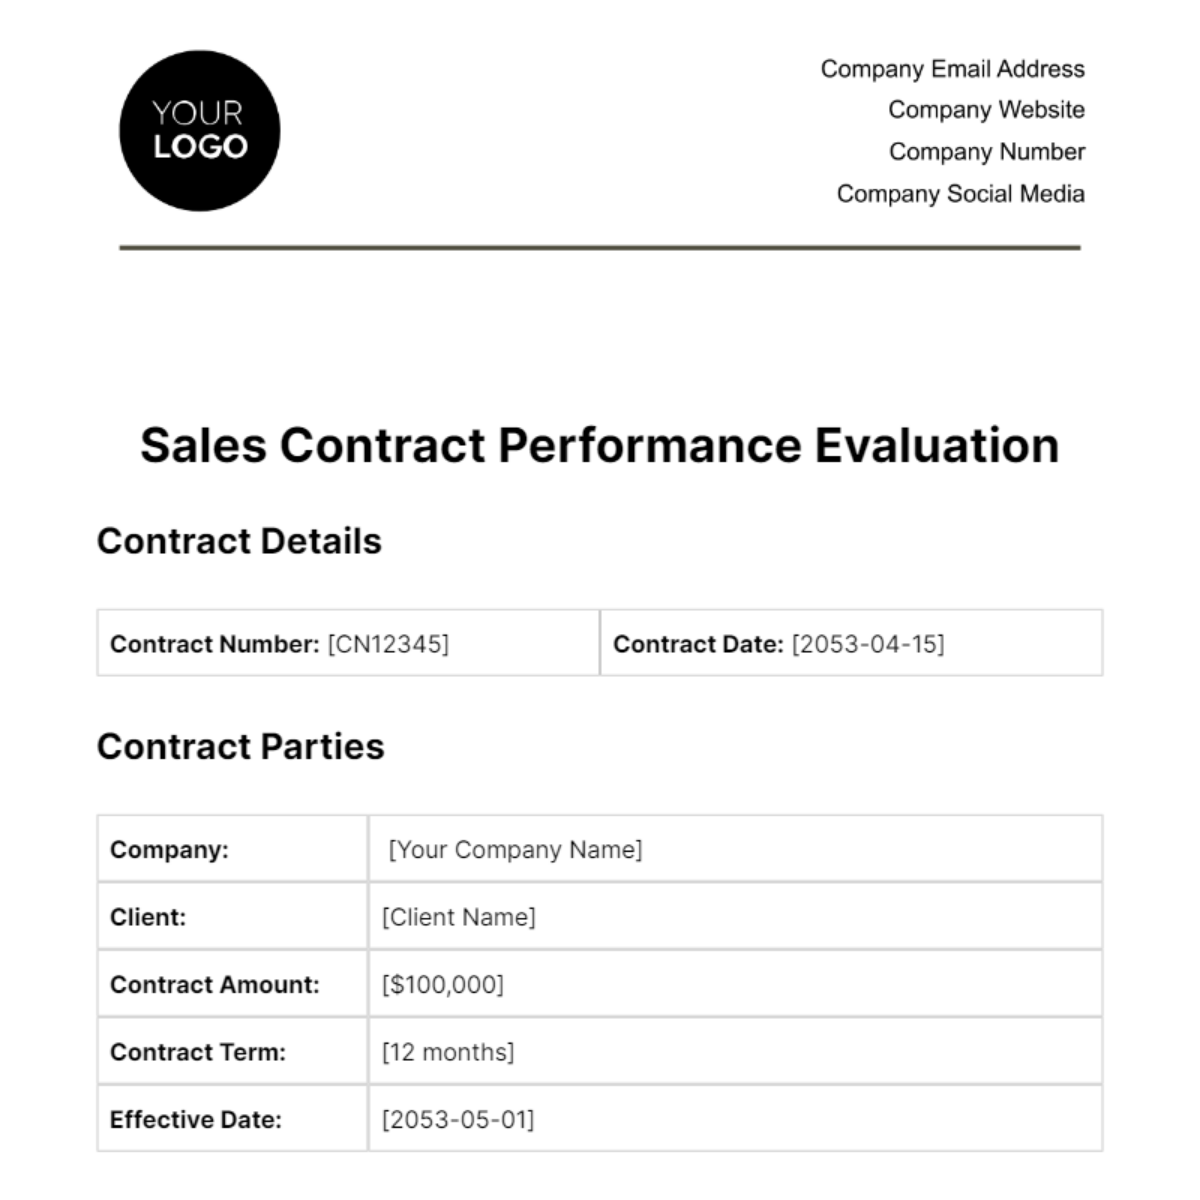 Free Sales Contract Performance Evaluation Template